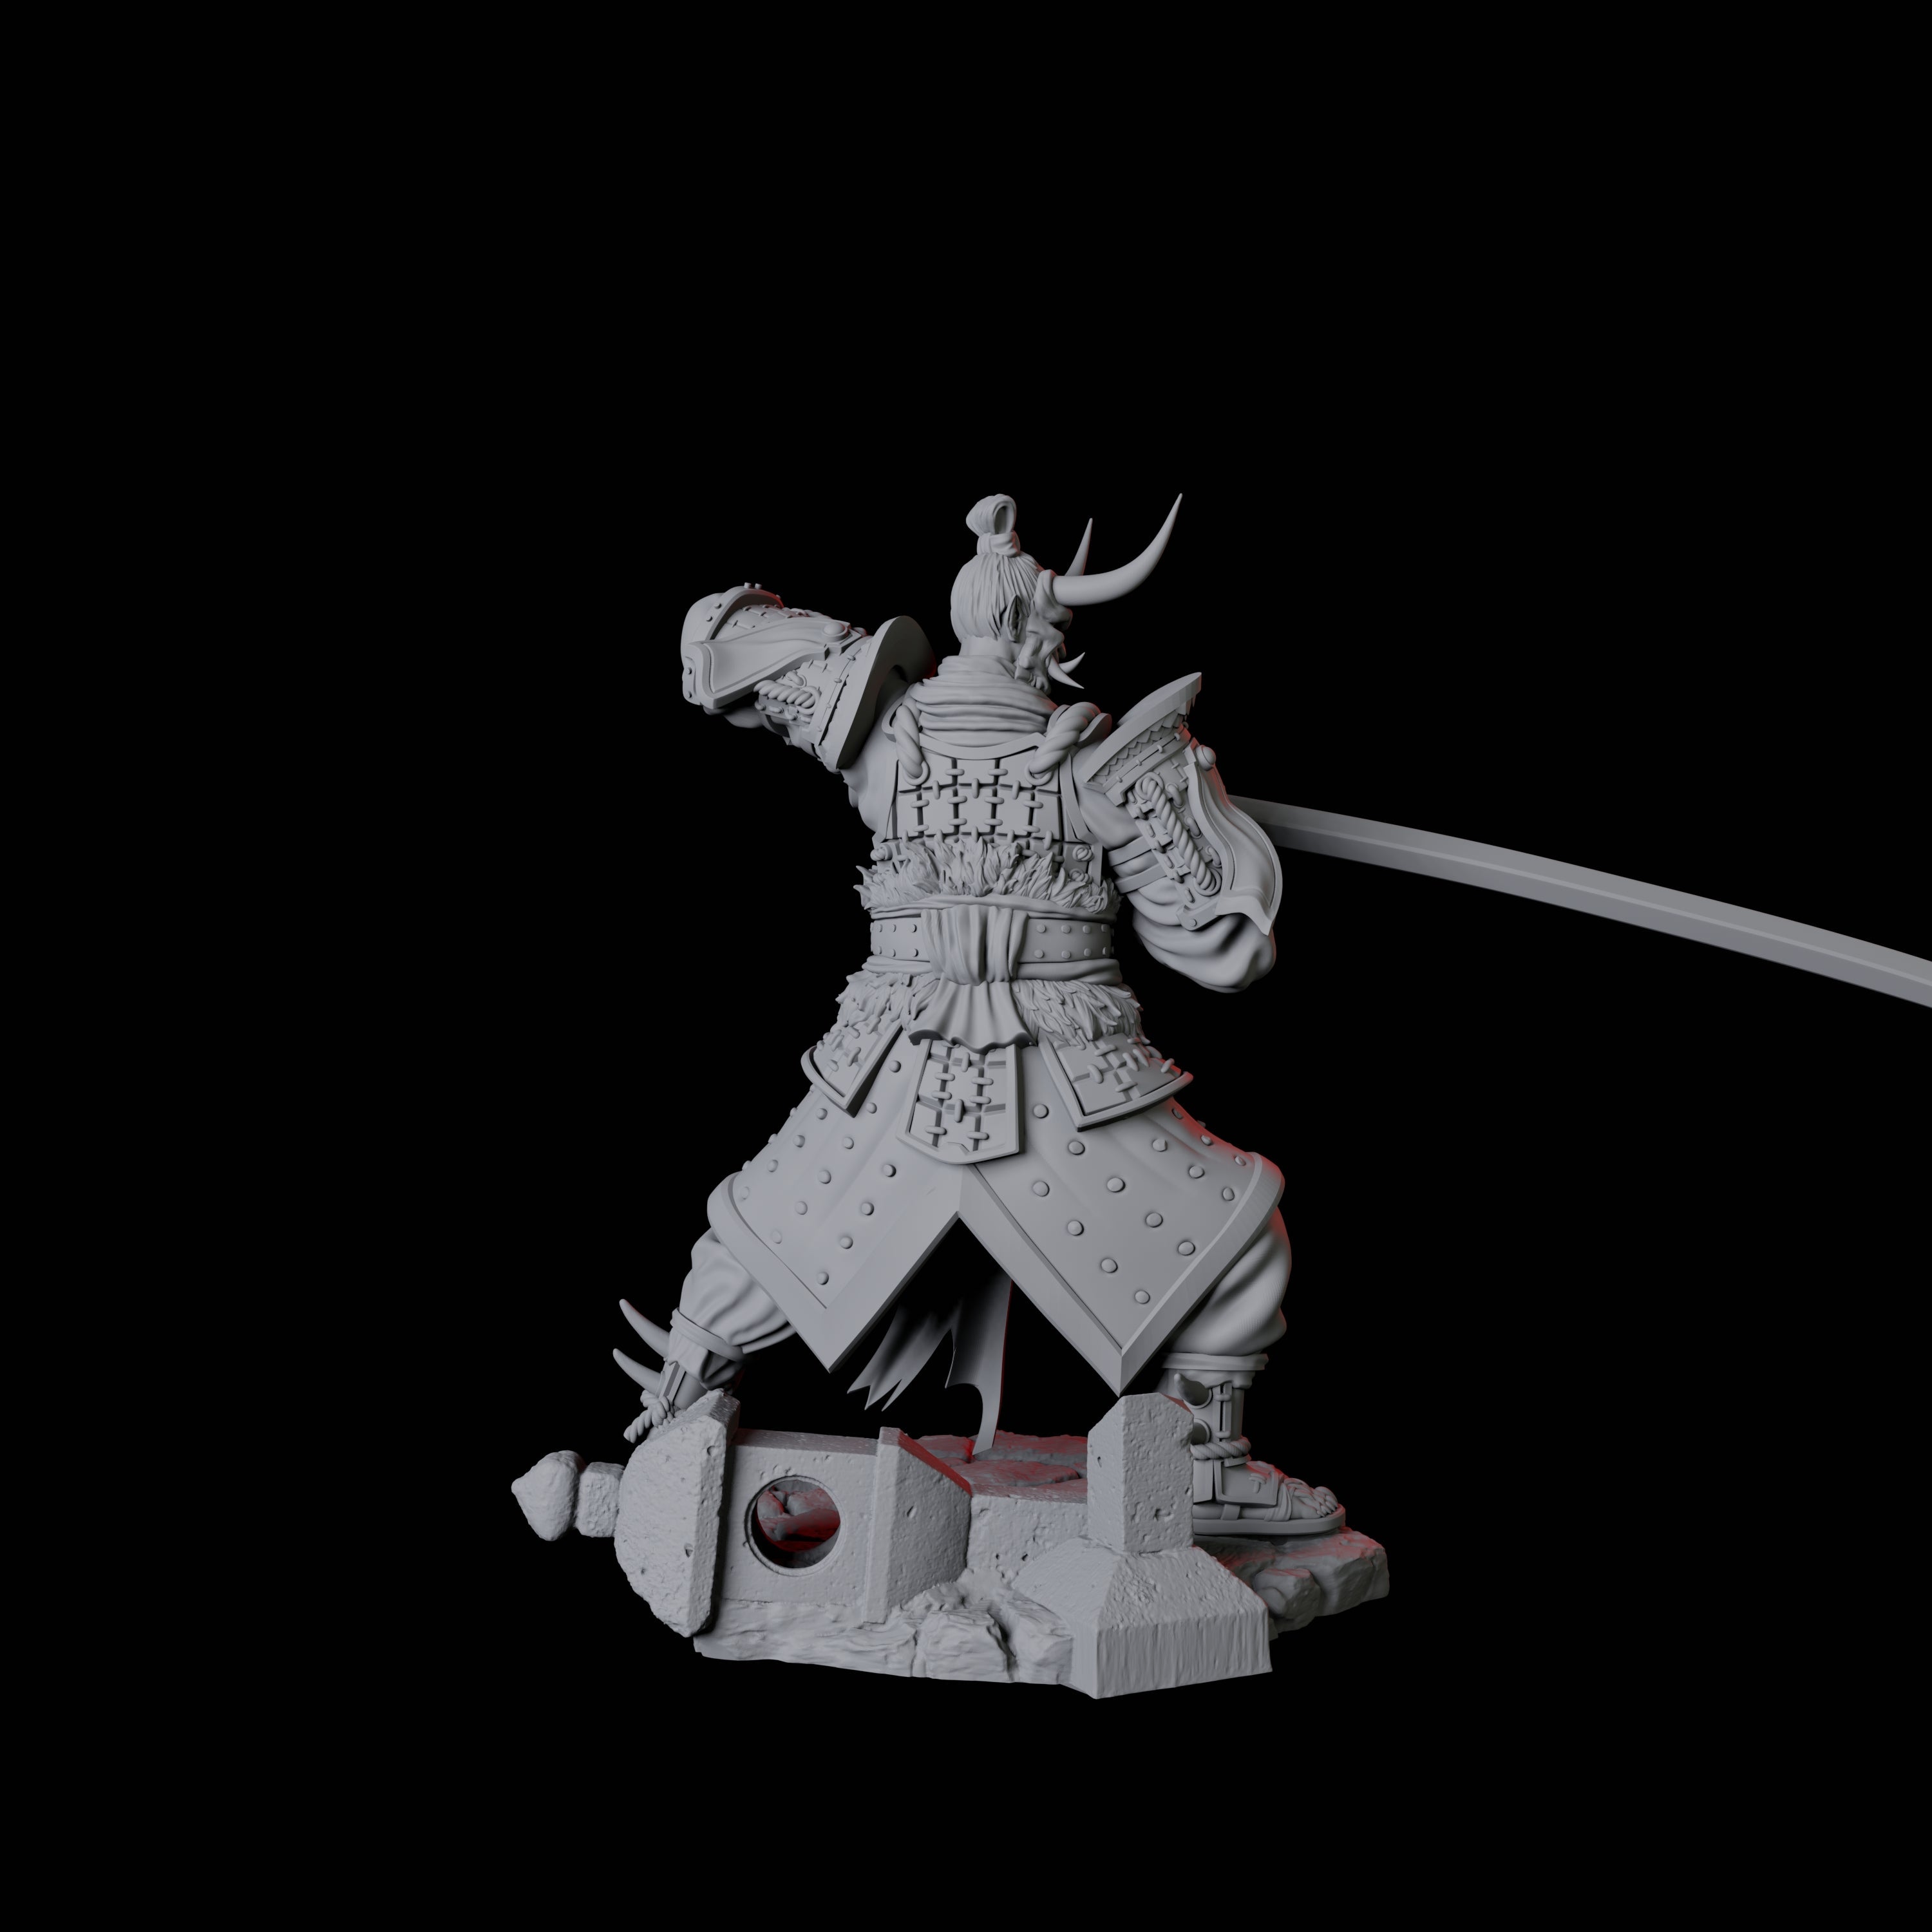 Oni Death Samurai D Miniature for Dungeons and Dragons, Pathfinder or other TTRPGs